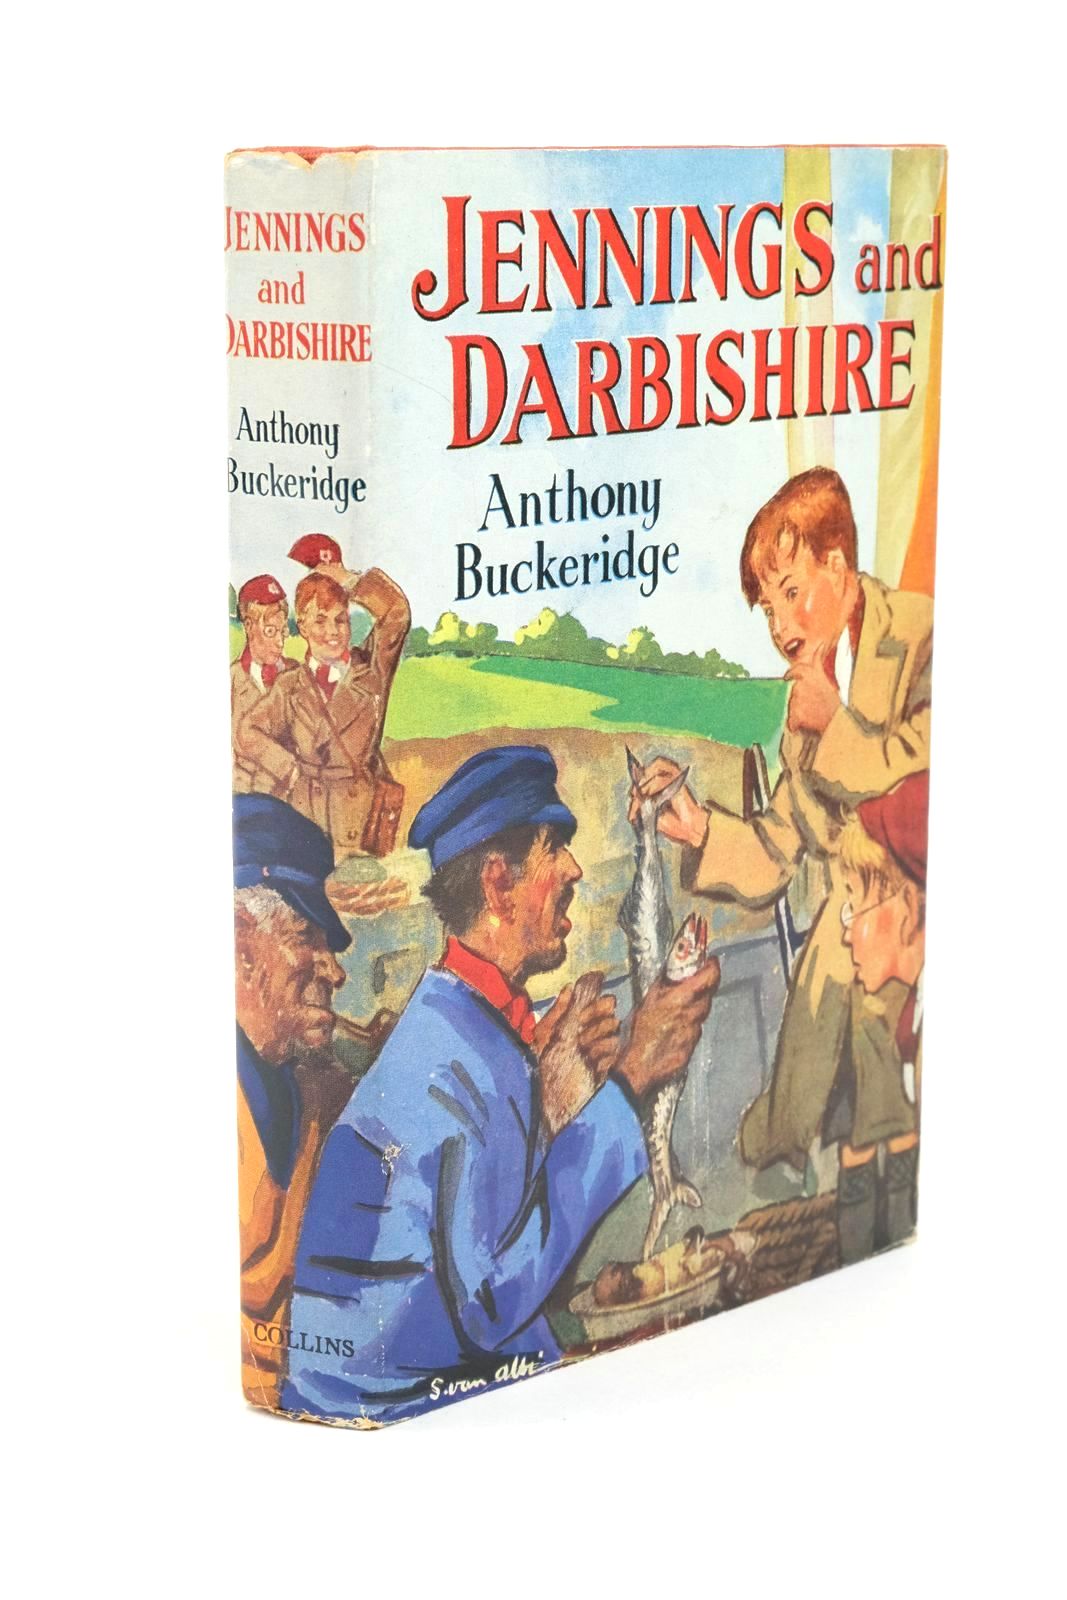 Photo of JENNINGS AND DARBISHIRE written by Buckeridge, Anthony published by Collins (STOCK CODE: 1322833)  for sale by Stella & Rose's Books